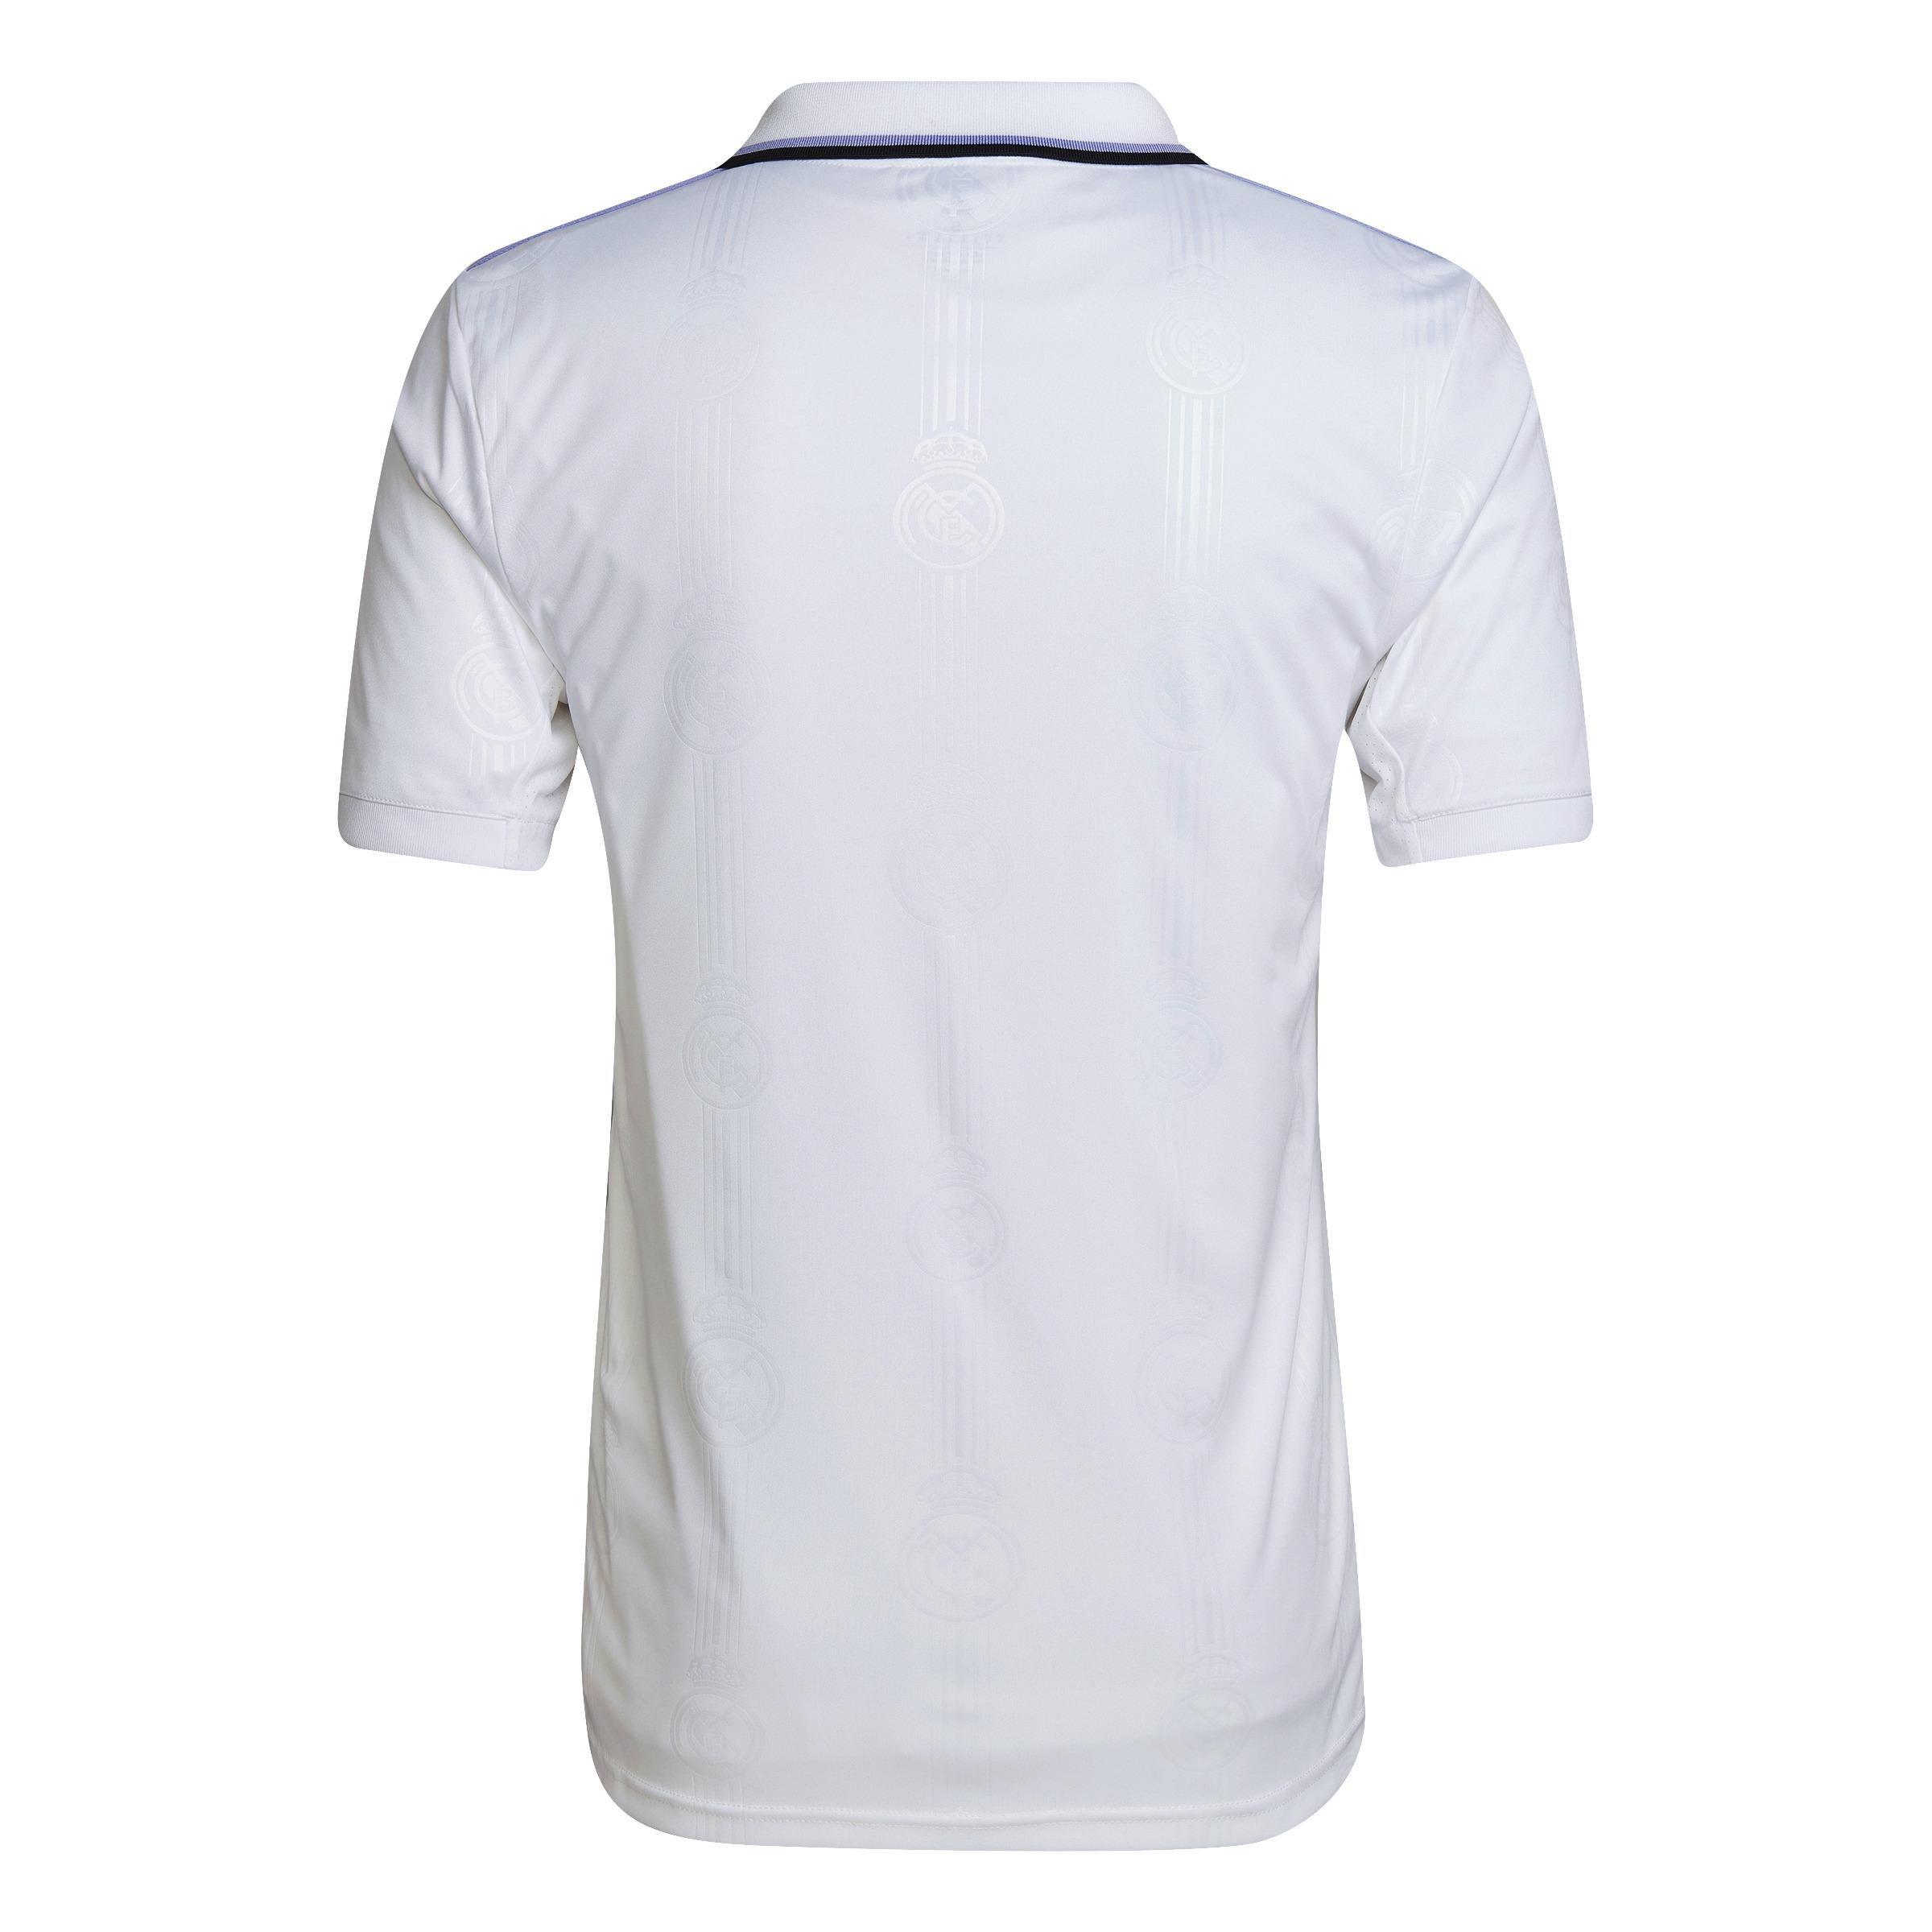 adidas - Men Real Madrid 22/23 Home Jersey, White